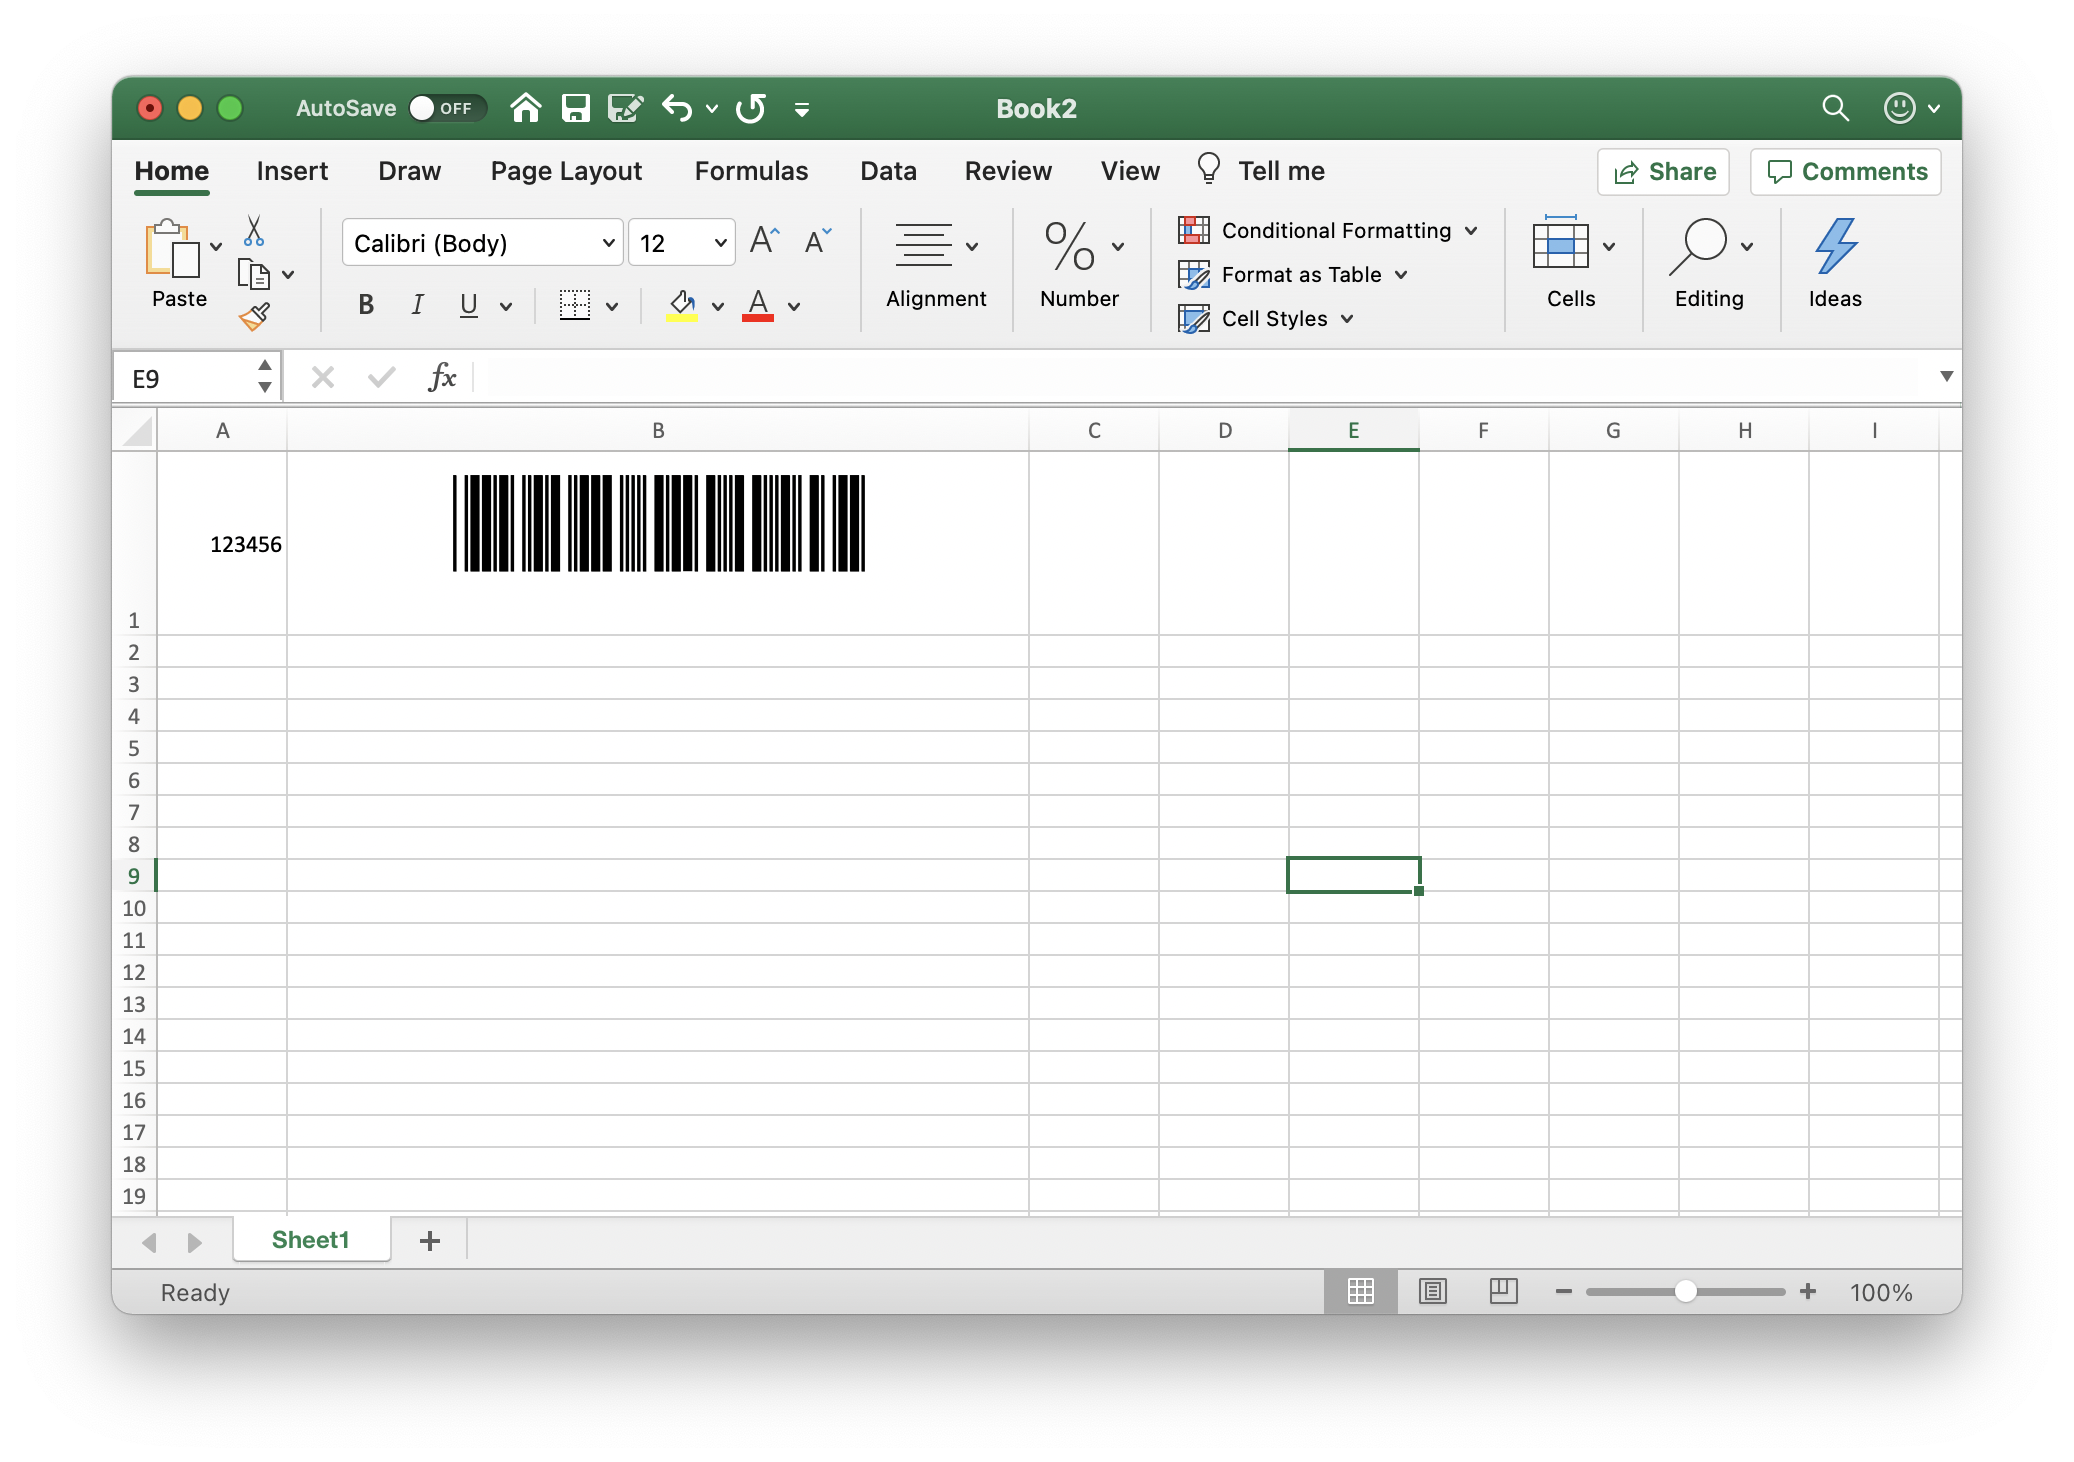 Creating barcodes in Microsoft Office for Mac